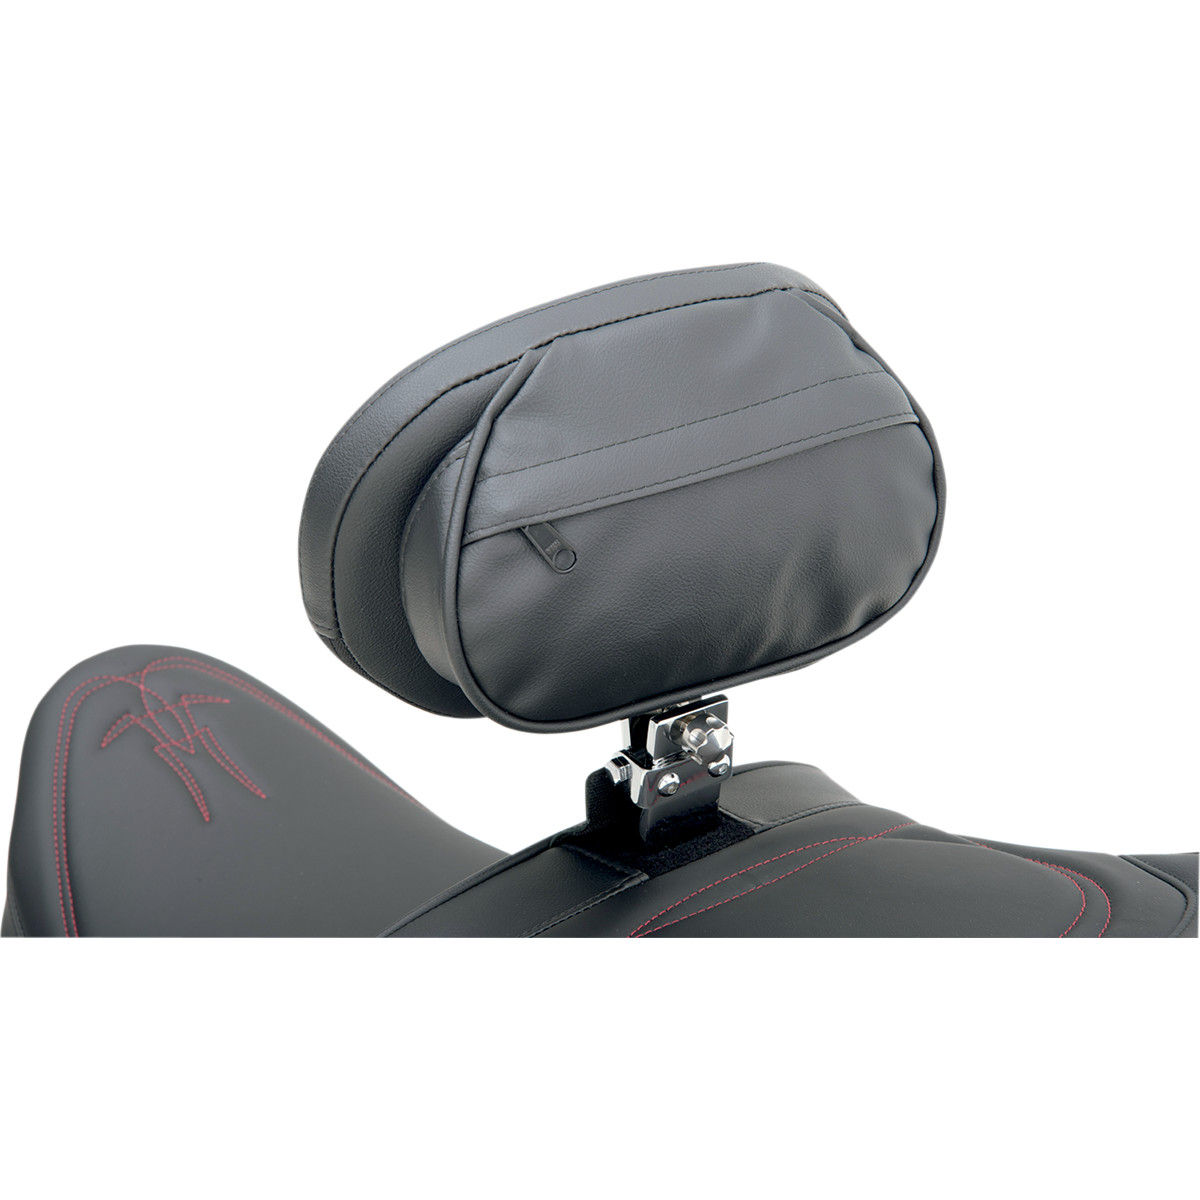 HARLEY DAVIDSON BACKREST CONVERTIBLE EZ GLIDE I DRIVER SMOOTH WITH POUCH AND RAIN COVER VINYL BLACK